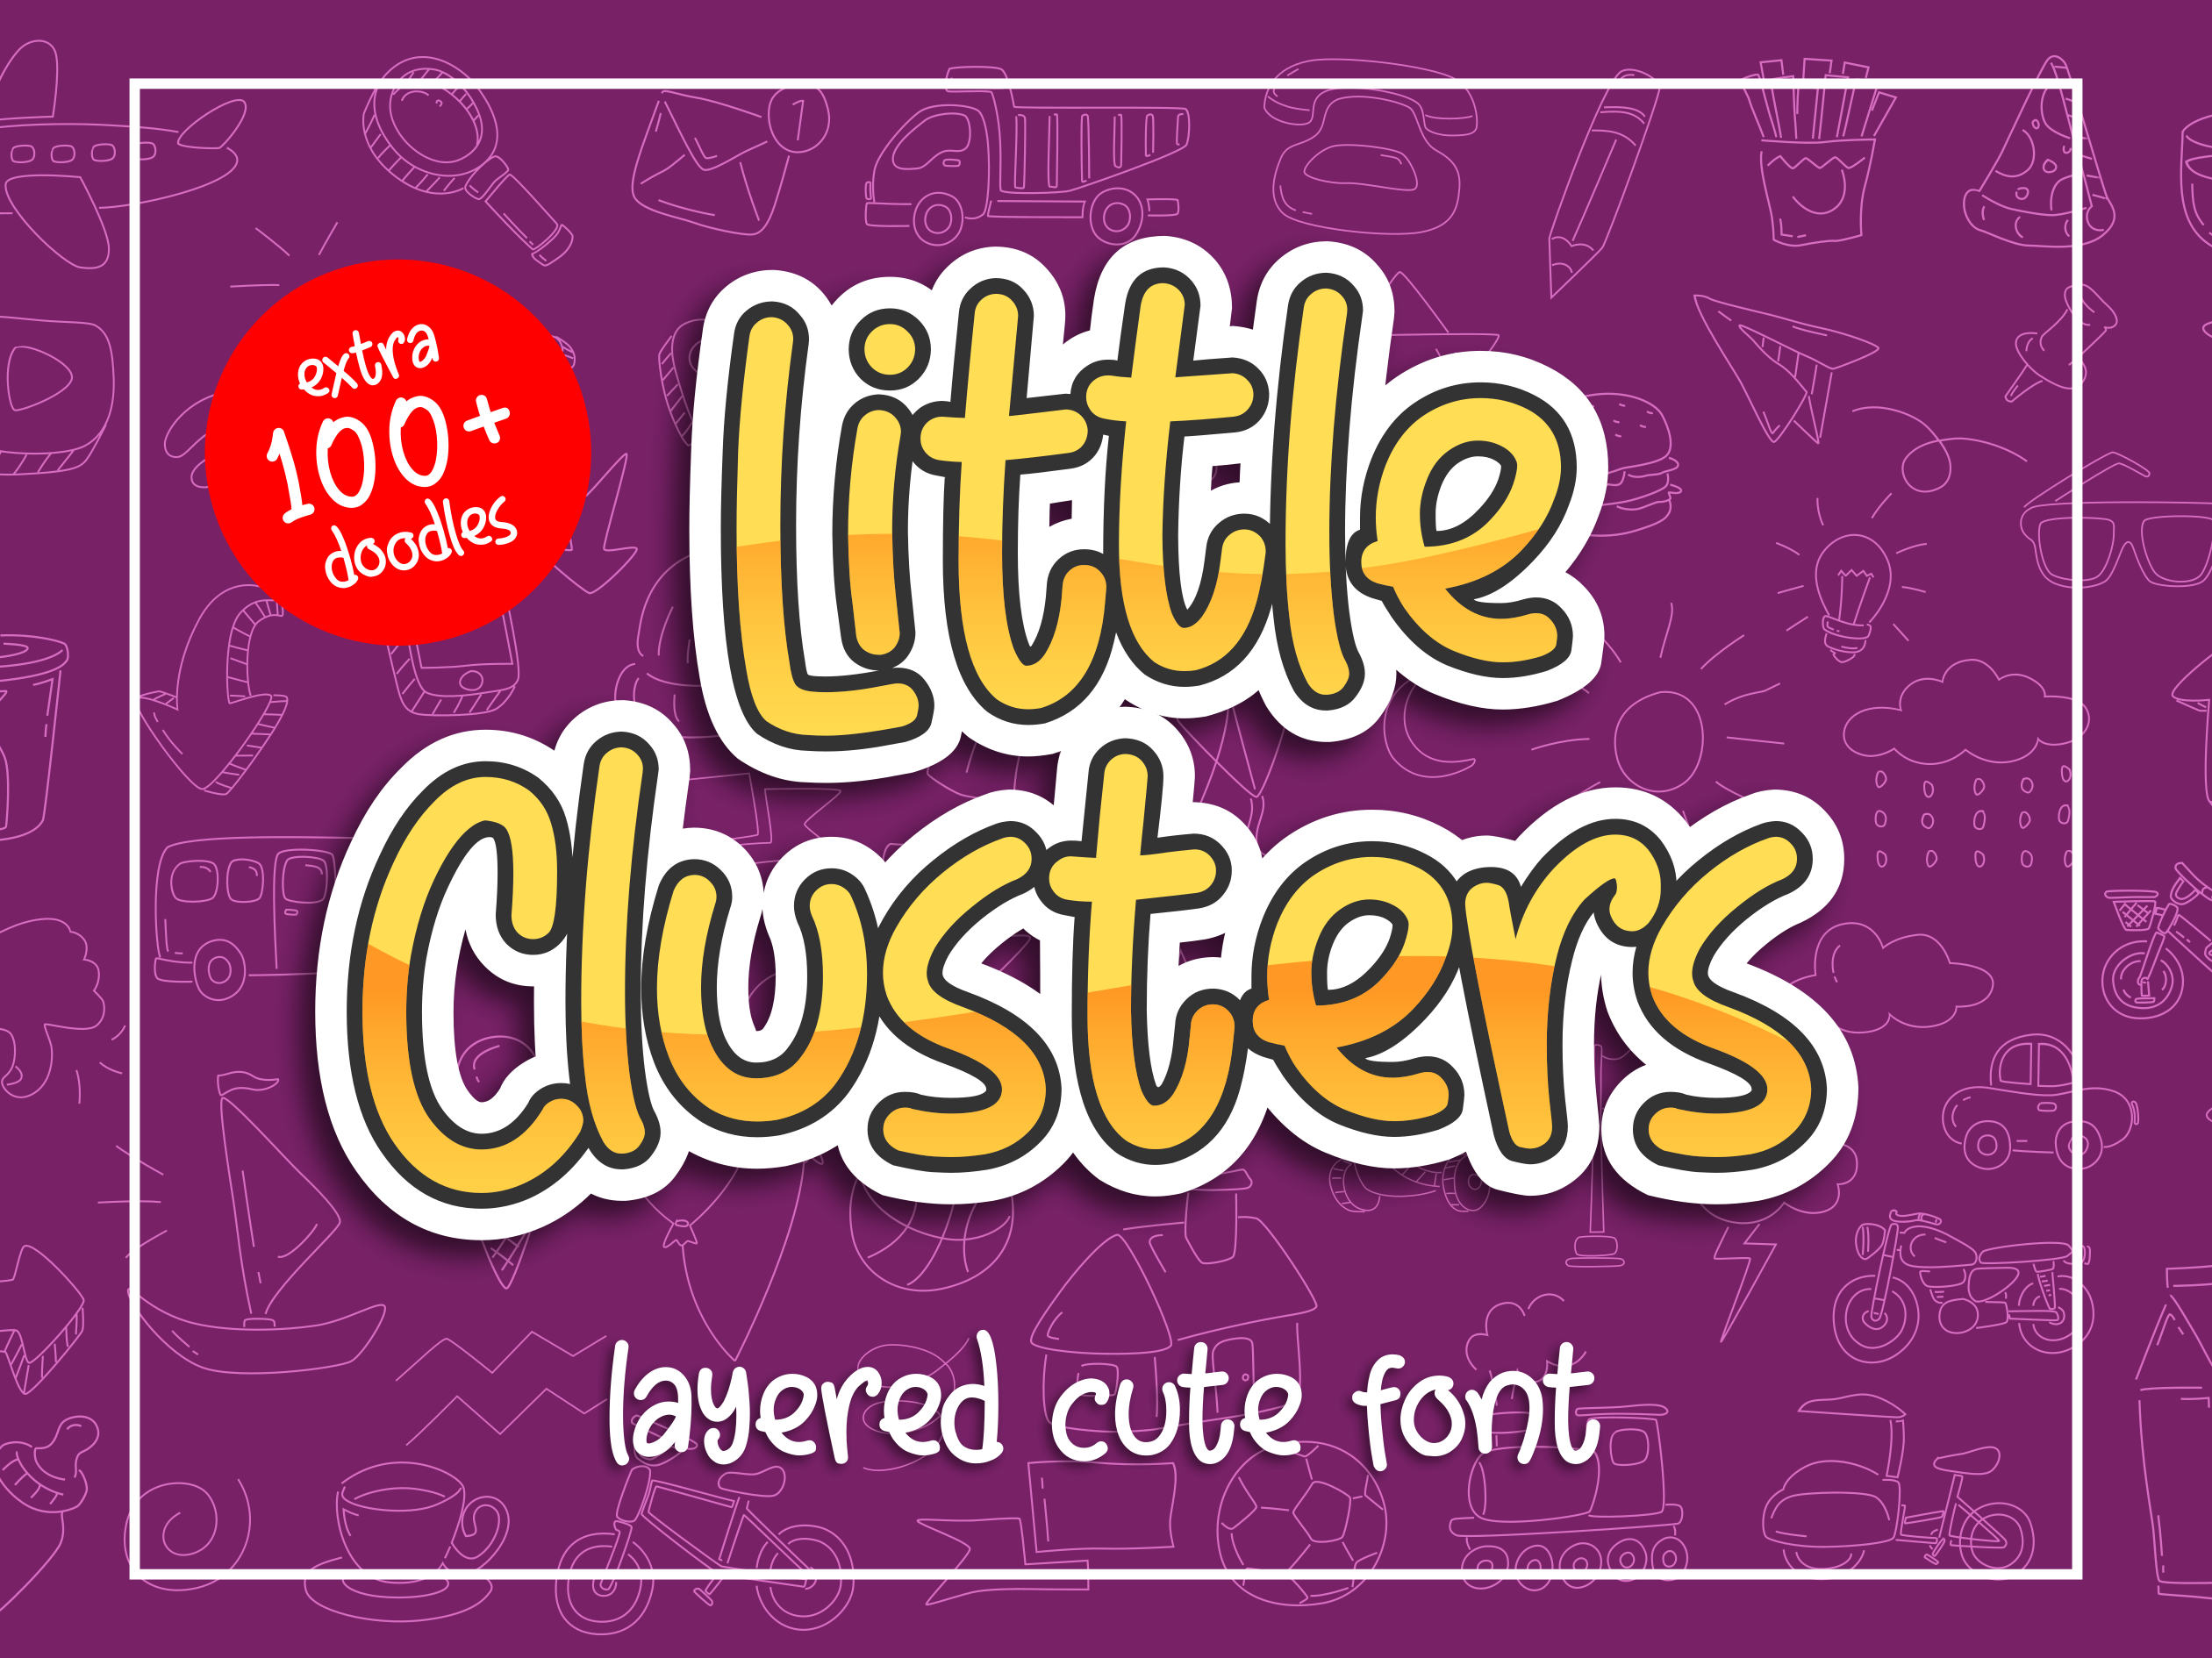 Download Little Clusters Layered Cute Font By Panggah Laksono On Dribbble PSD Mockup Templates